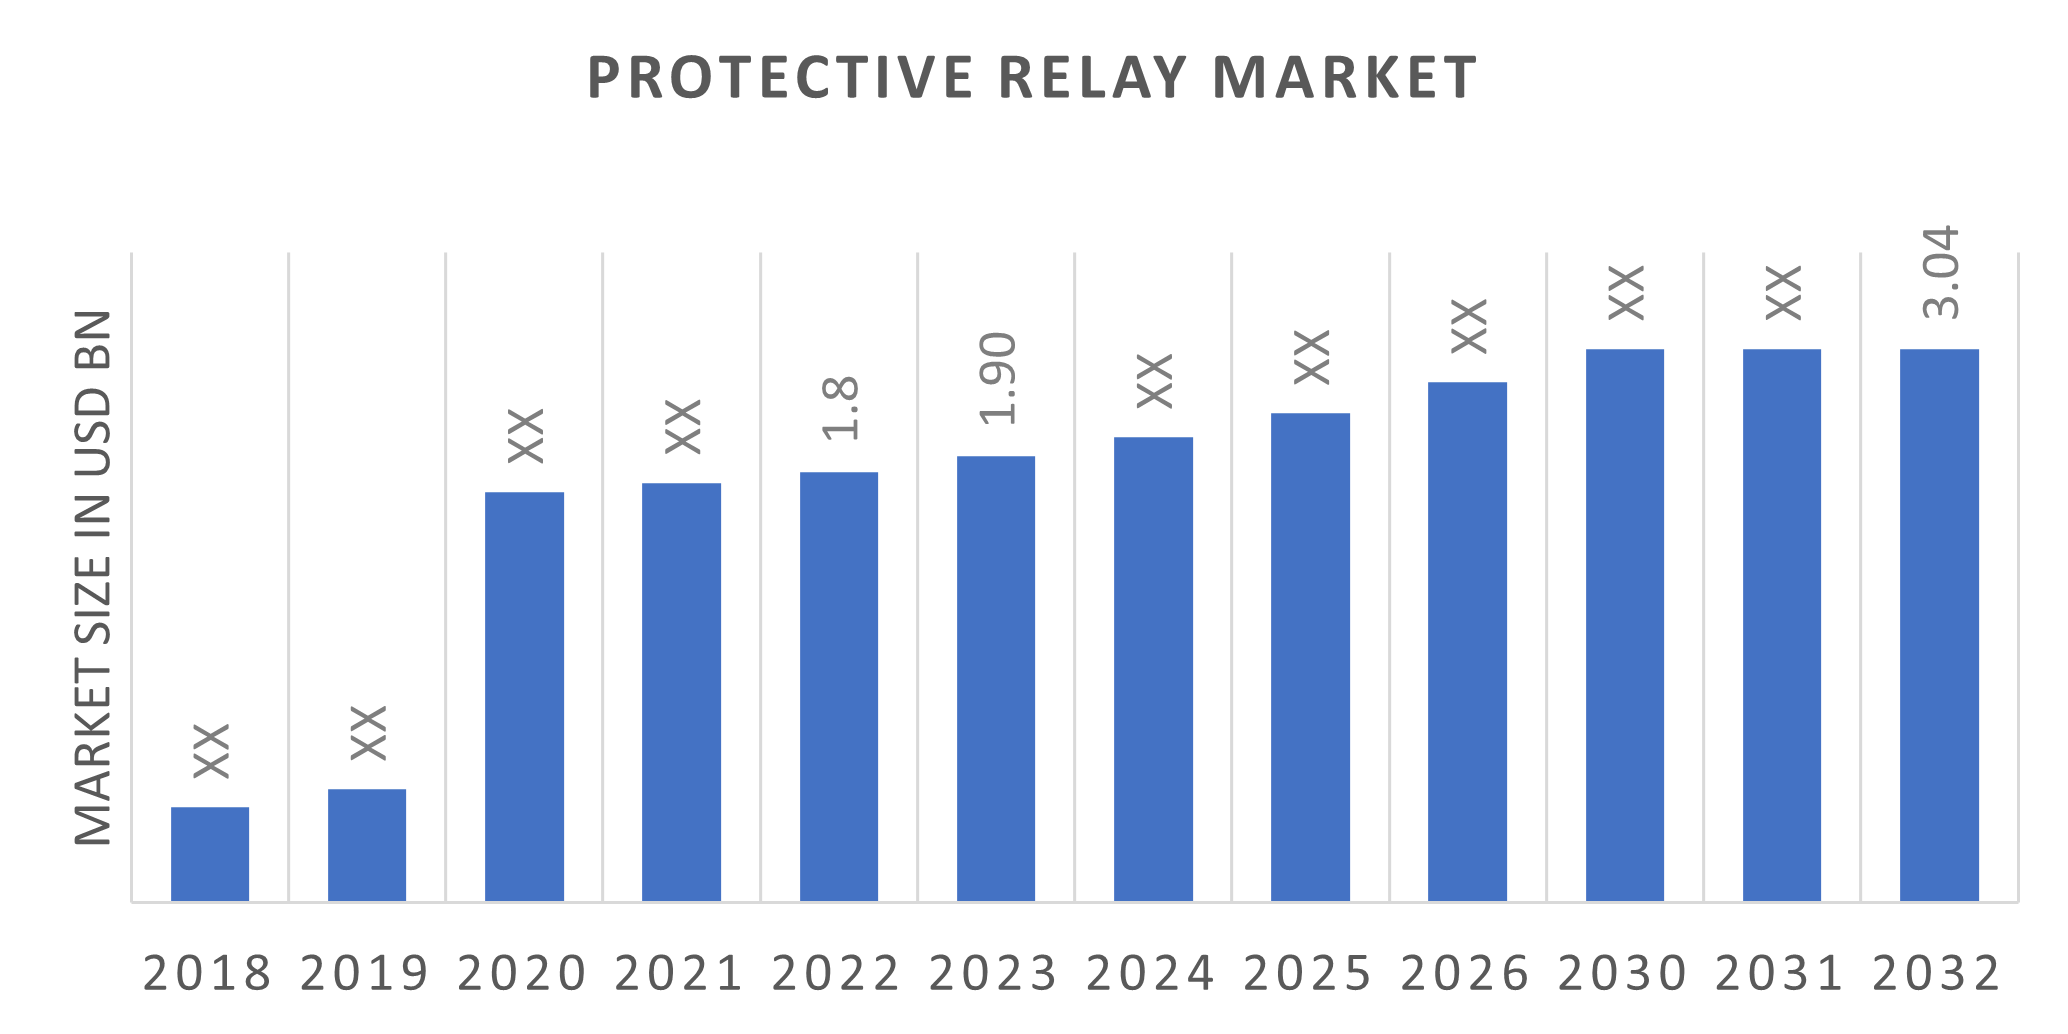 Global Protective Relay Market Overview